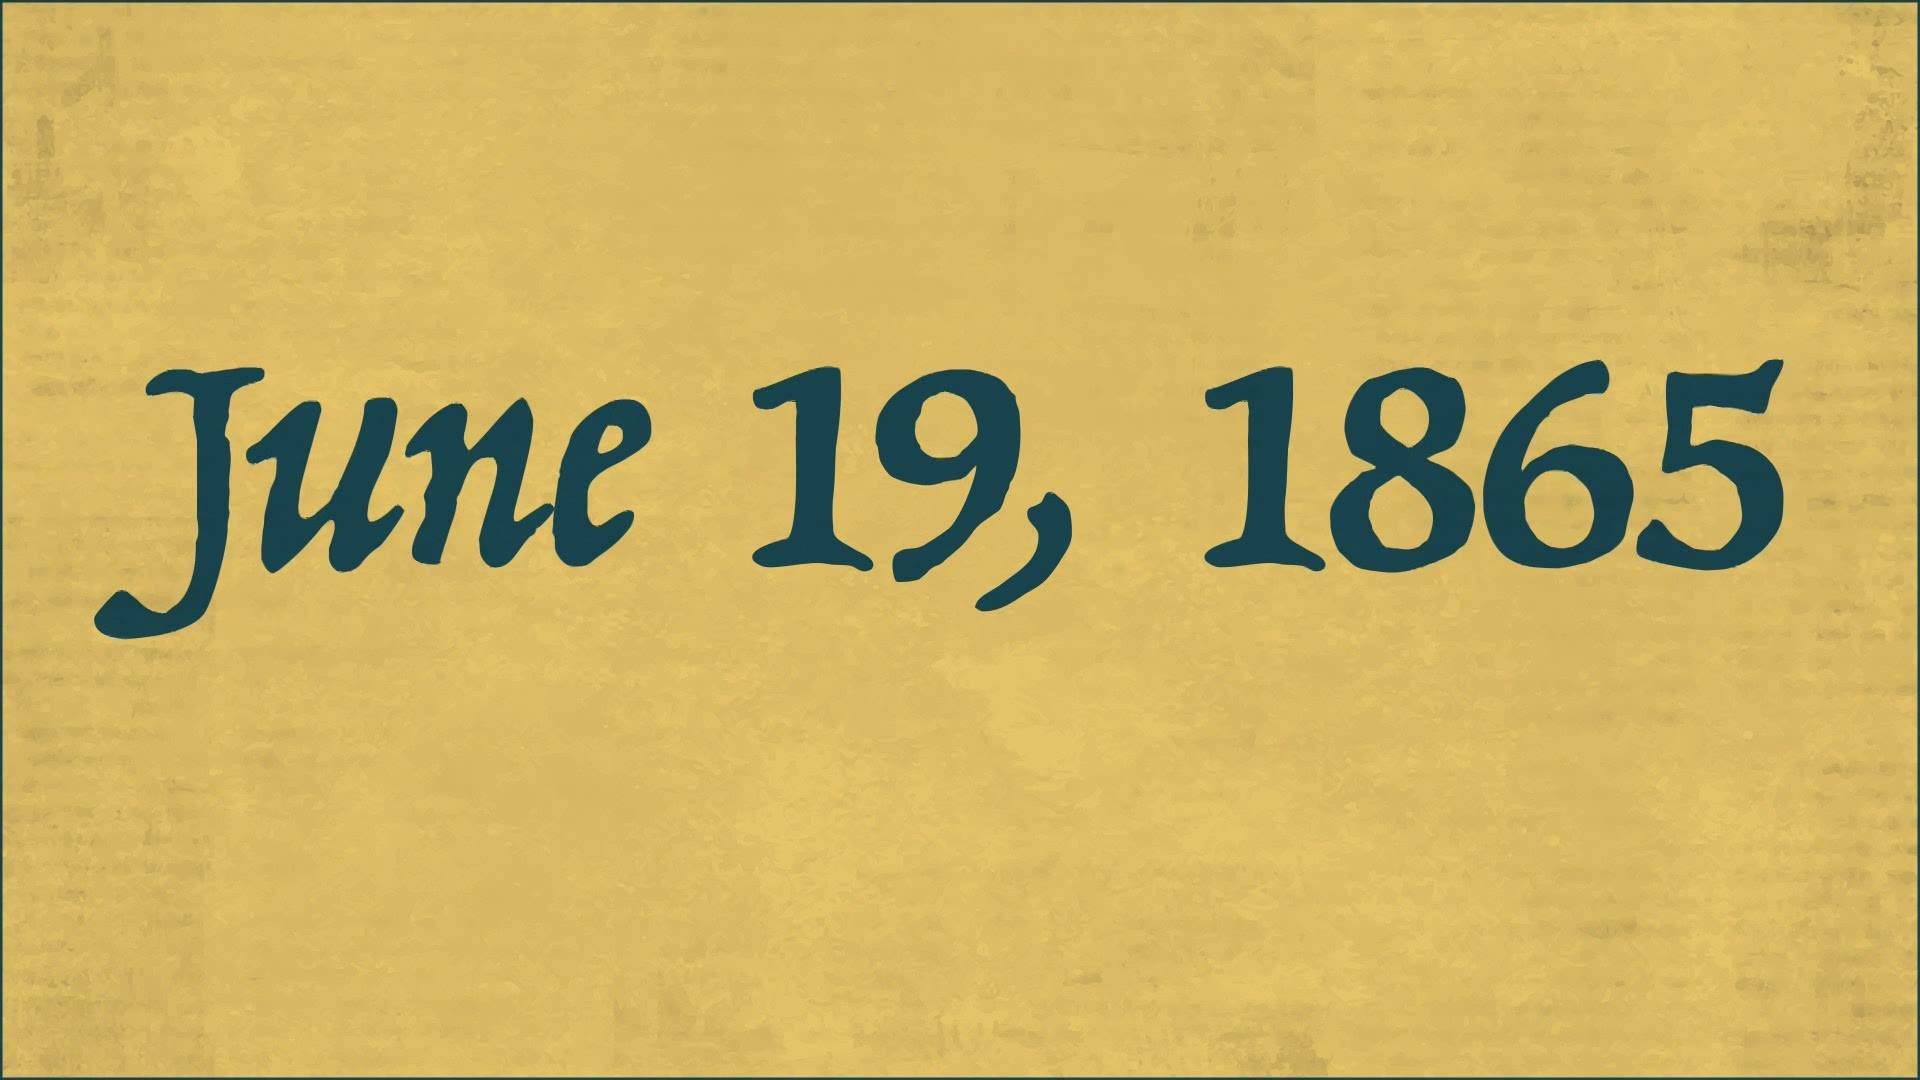 Here's the history behind the June 19 holiday.